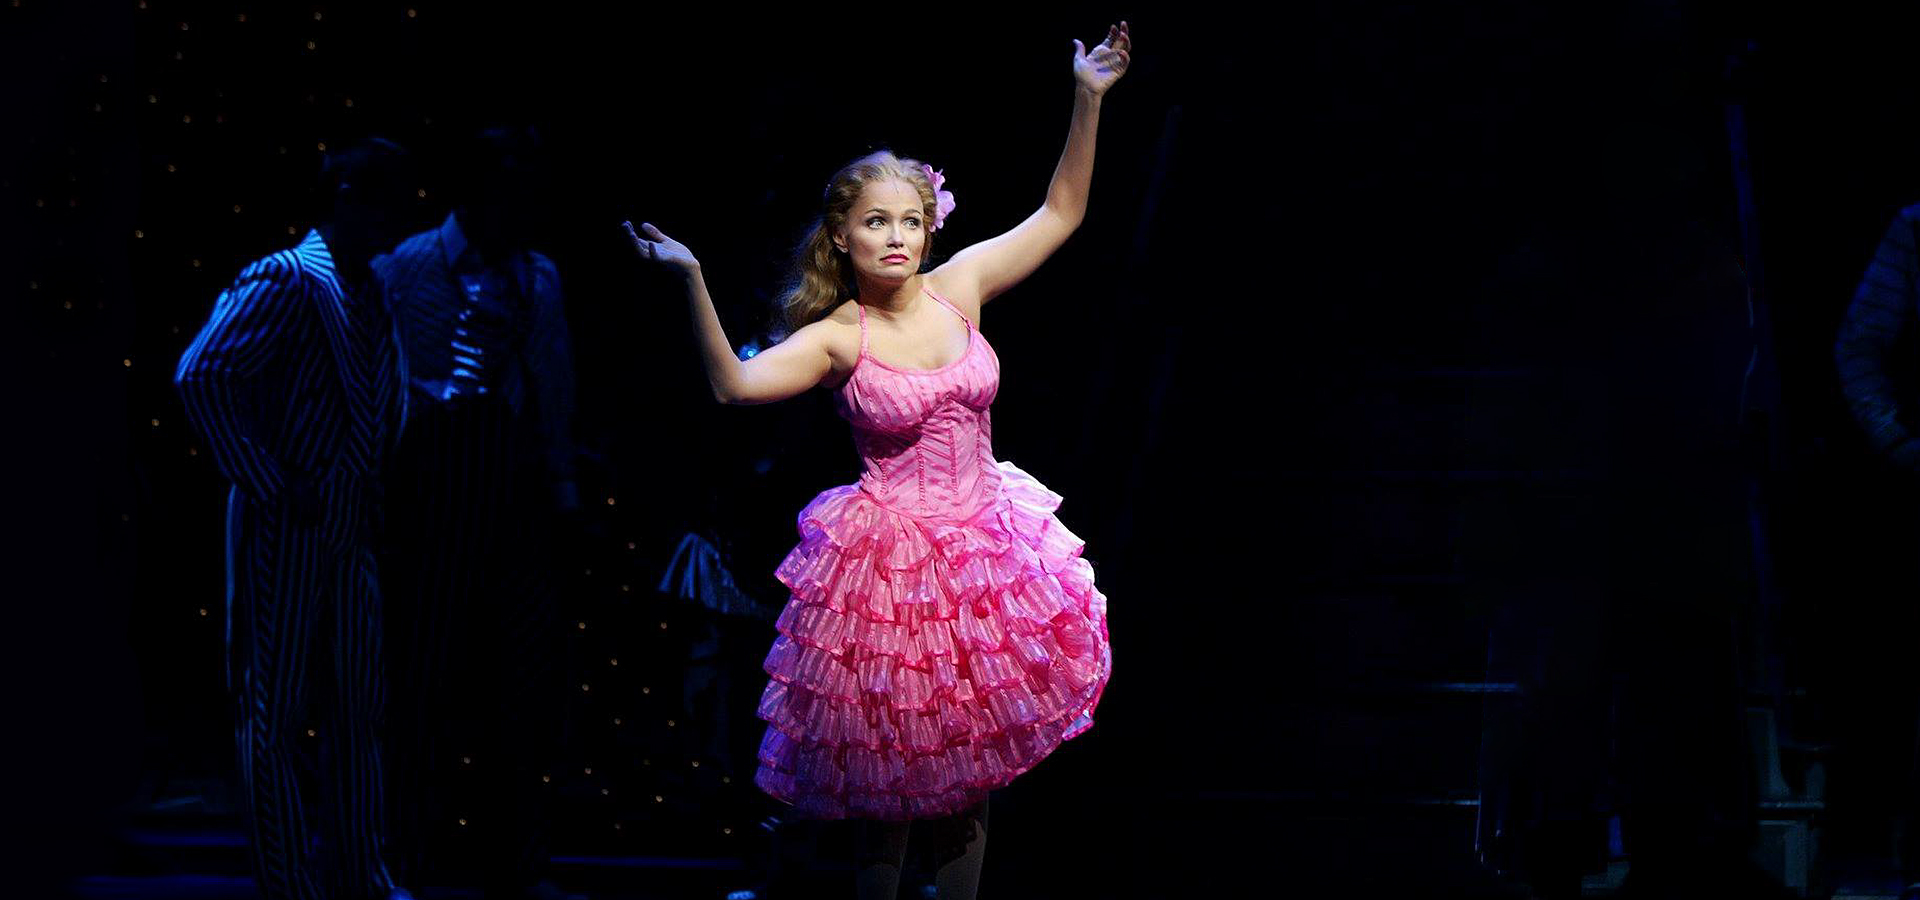 Kristin Chenowith is brightly lit on a dark stage, standing in a vibrant, ruffled hot pink dress with her arms raised.